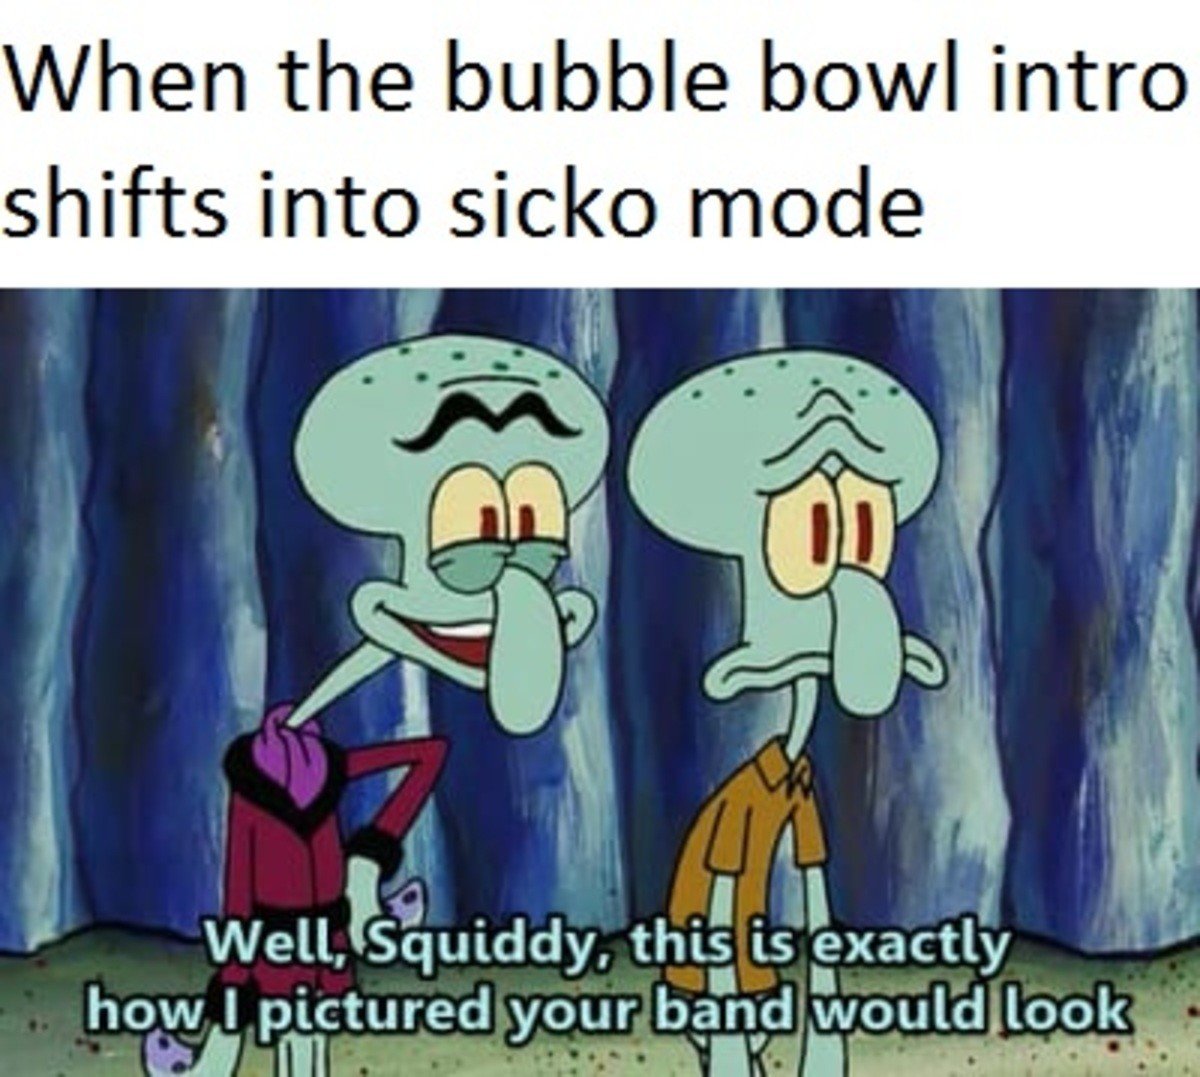 memes - sicko mode superbowl memes - When the bubble bowl intro shifts into sicko mode Well, Squiddy, this is exactly how I pictured your band would look